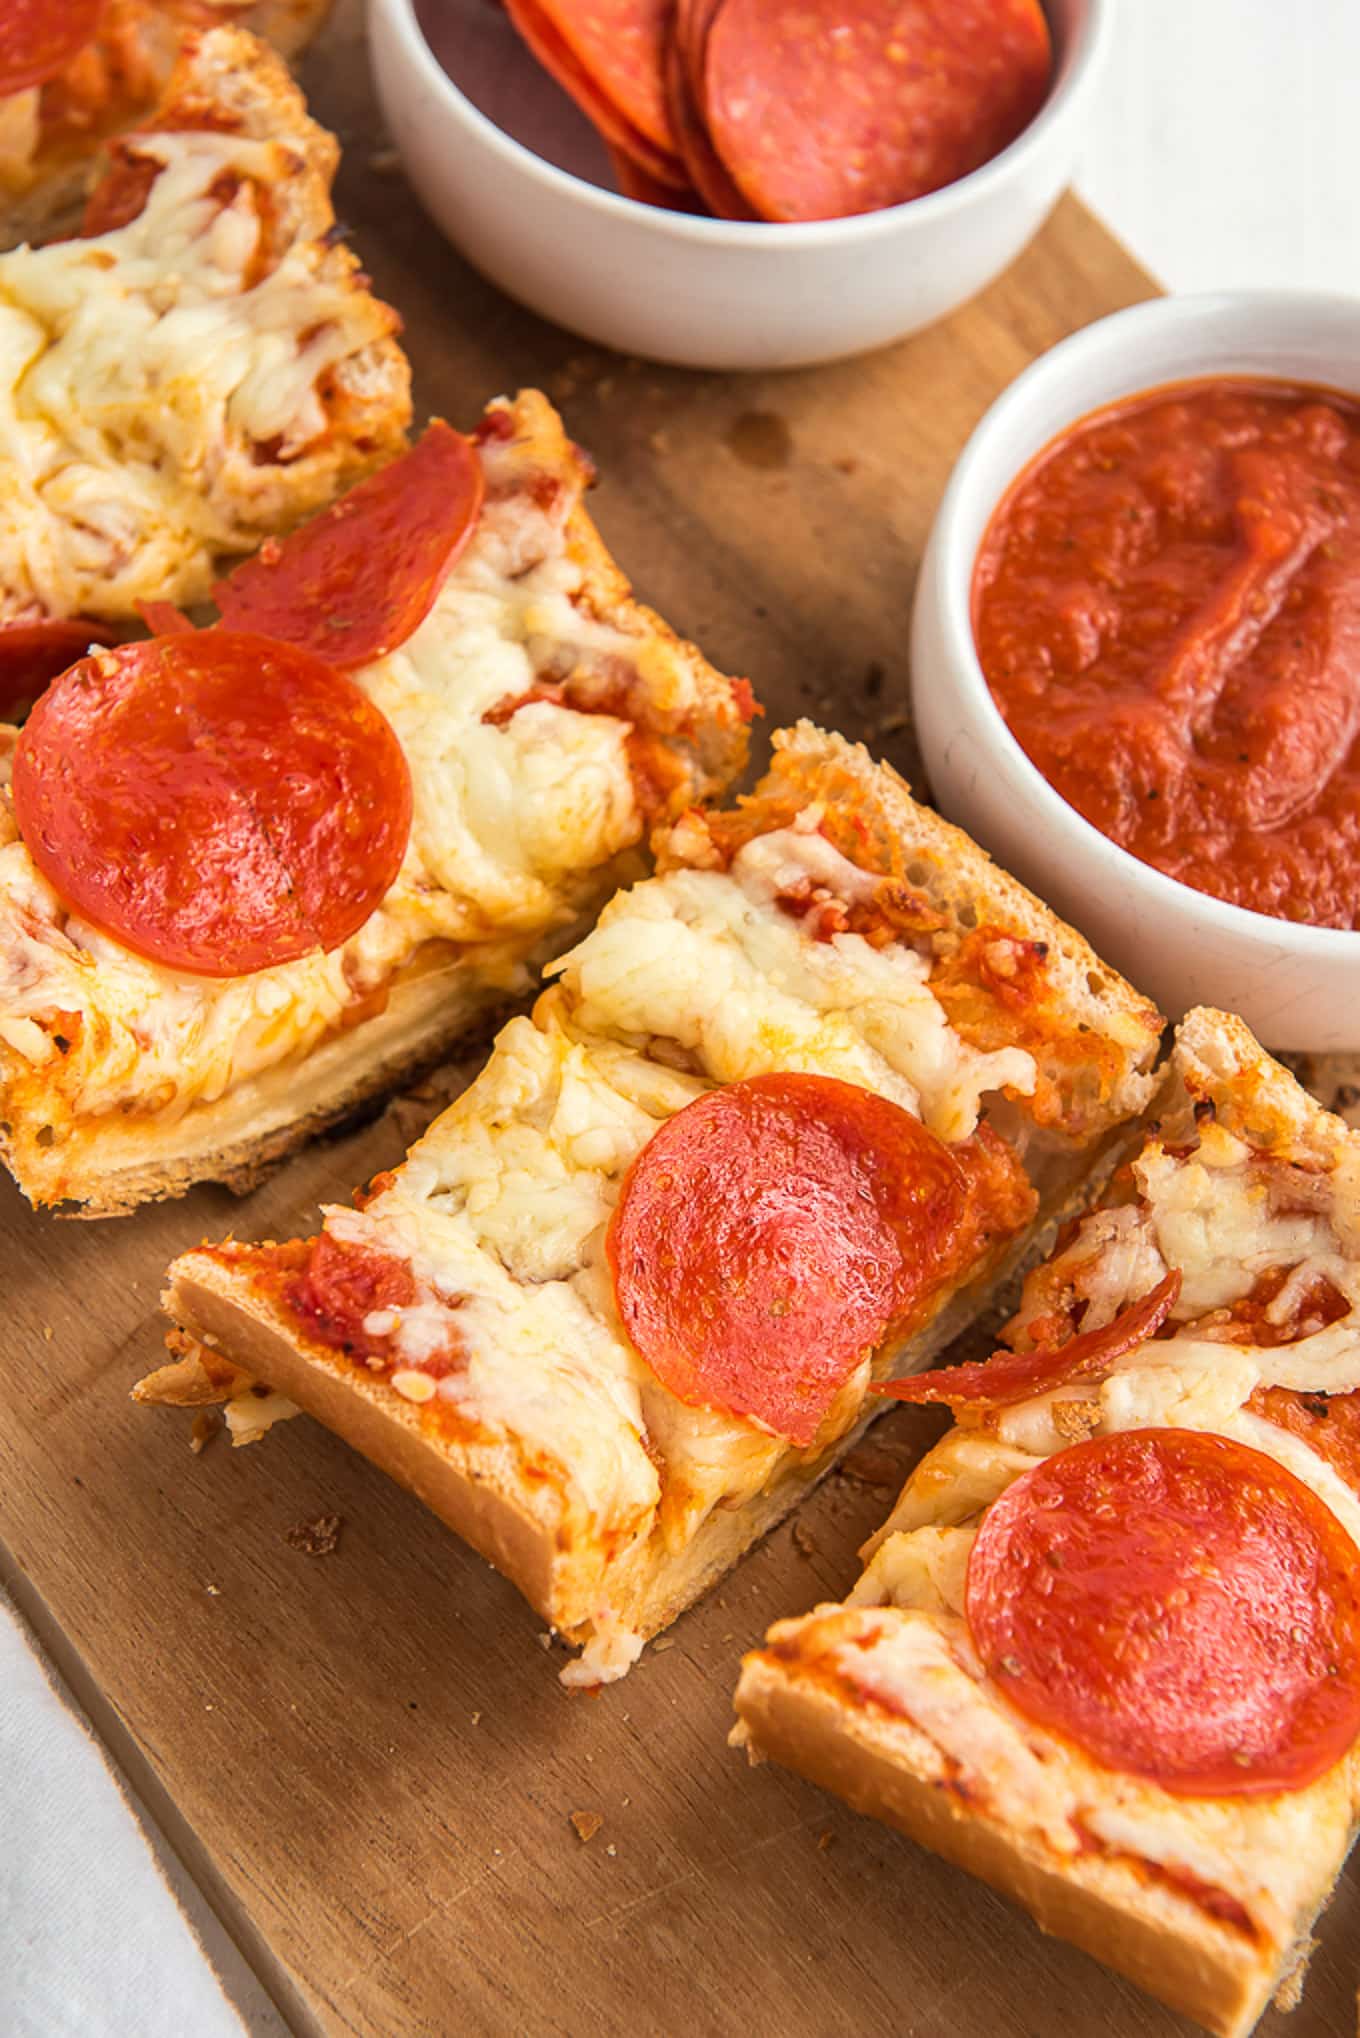 Tasty french bread pizza cut into slices.